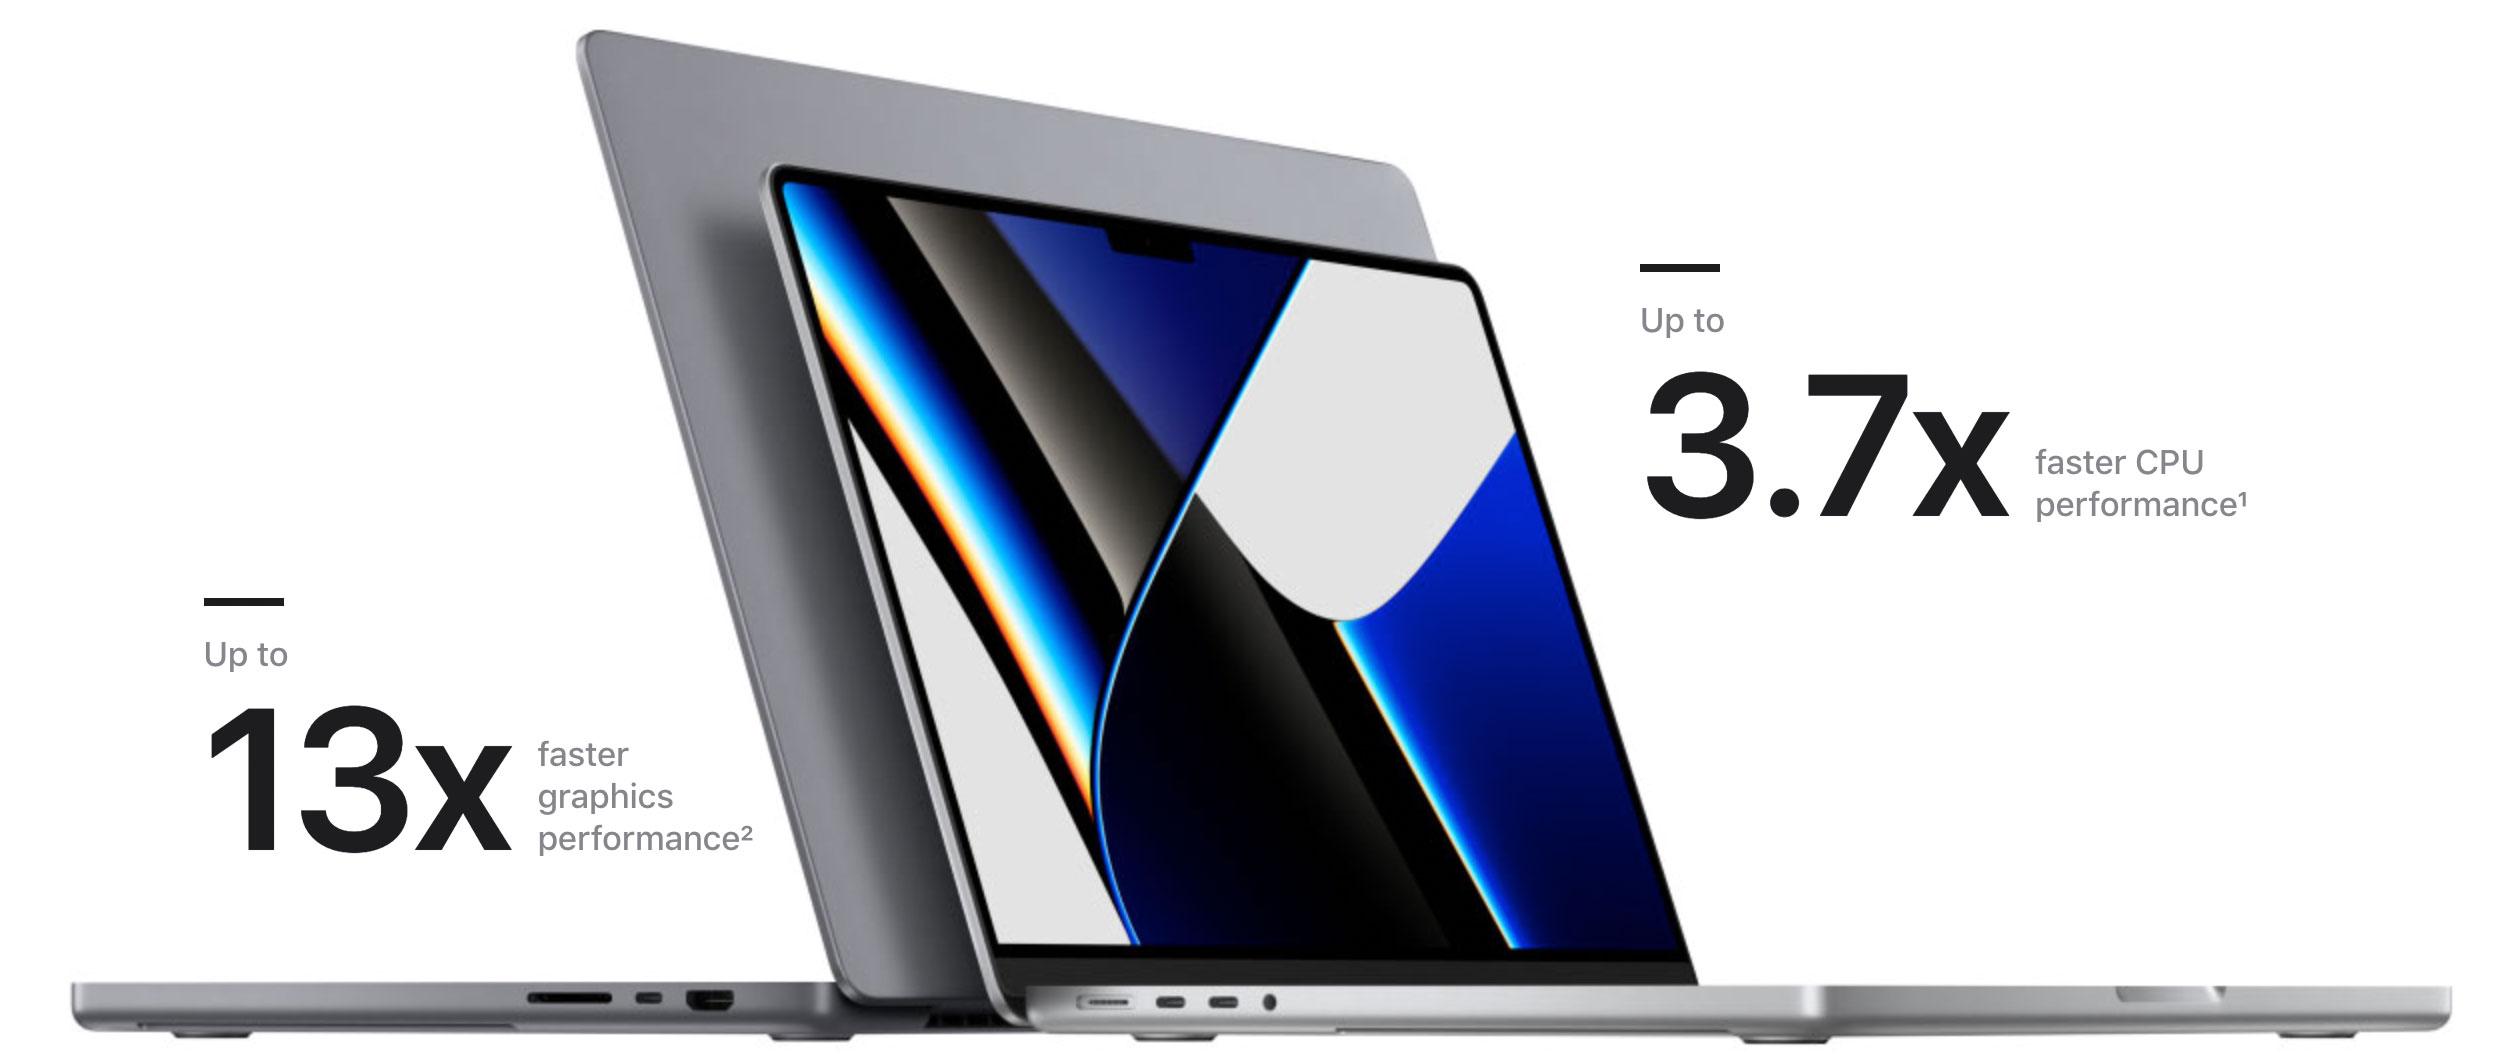 MacBook Pro performance comparison with M1 Pro or M1 Max